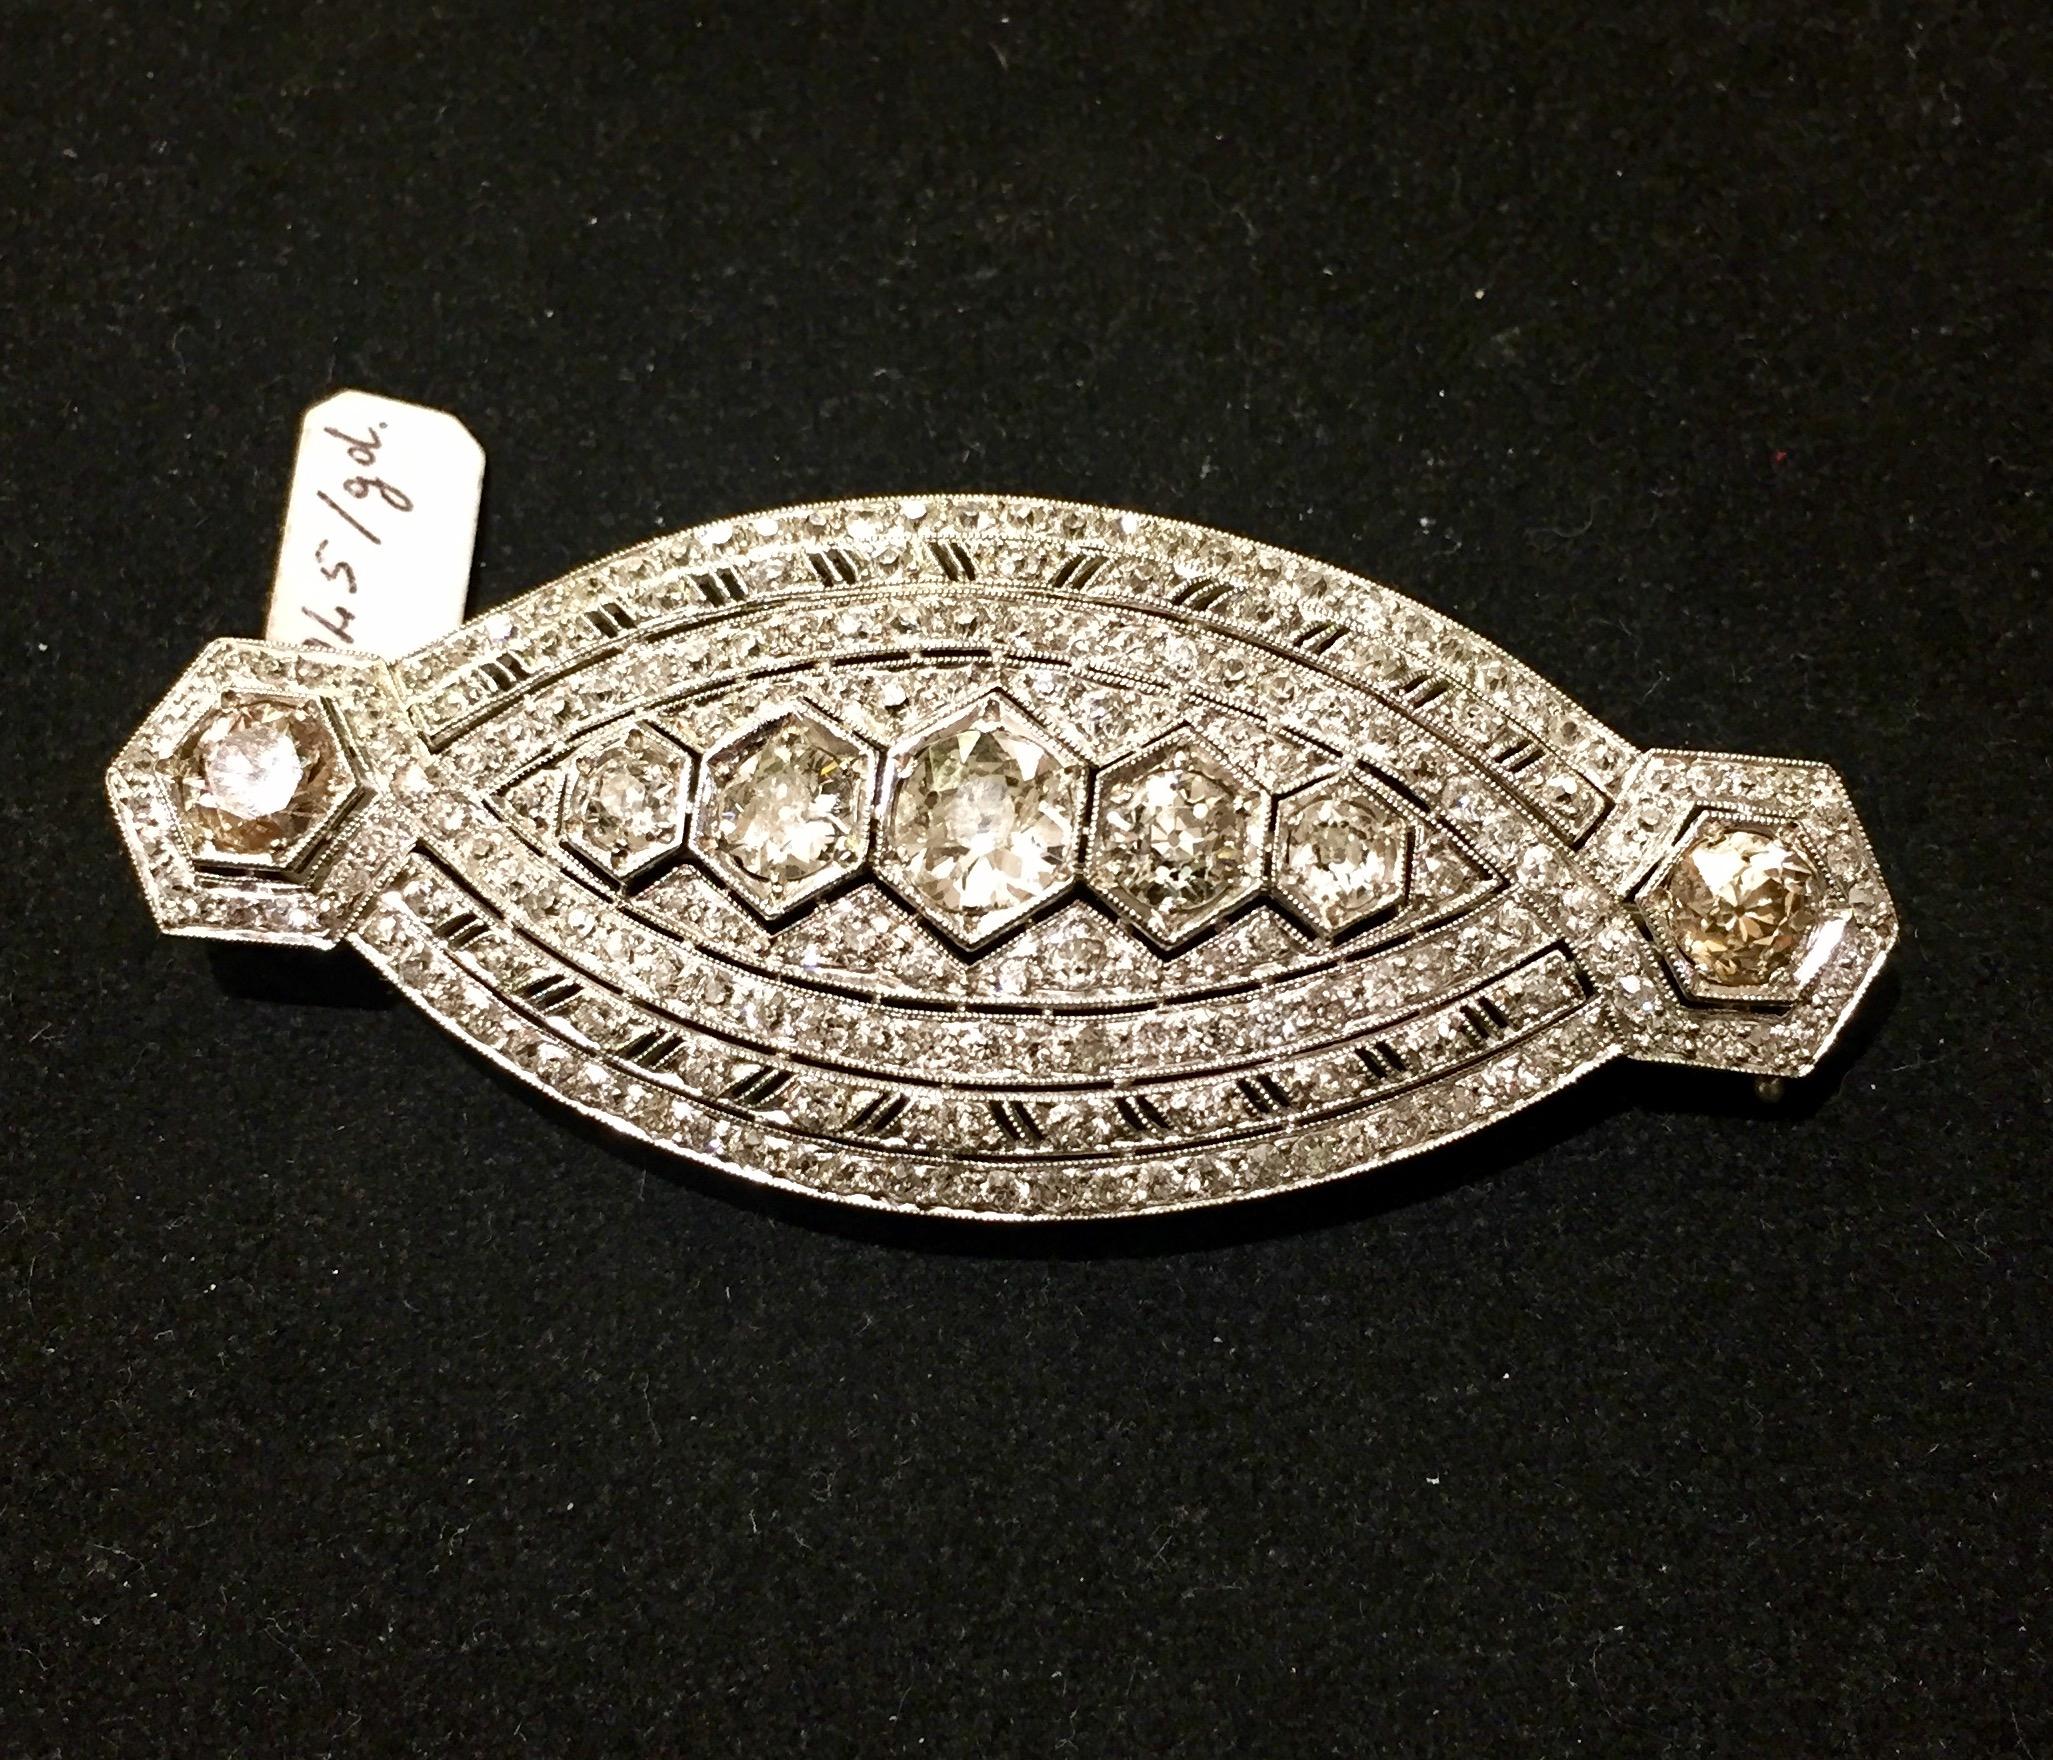 An Art Deco Platinum and Diamond Pendant/Brooch, consisting of a pierced filigree design and millegrain details, containing 7 old European cut diamond weighing approximately 4,5 carats, the other old European cut diamonds weighing approximately 2.50